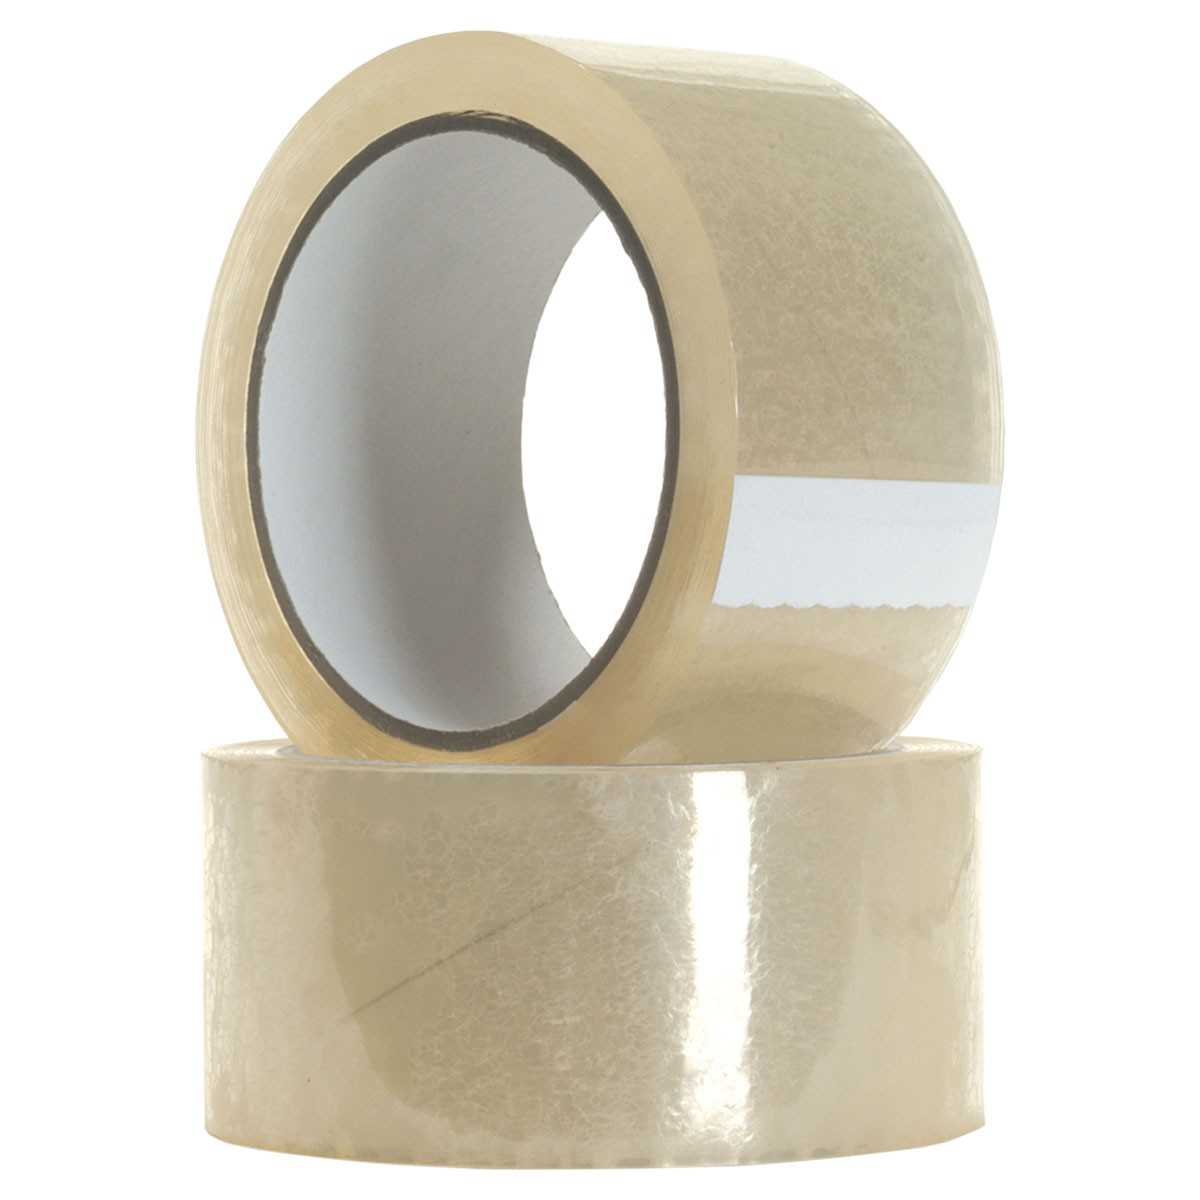 72 X NEW Rolls CLEAR VINYL PVC PACKING TAPE 48mm x 66M PRIMA BRANDED *24HRS* 